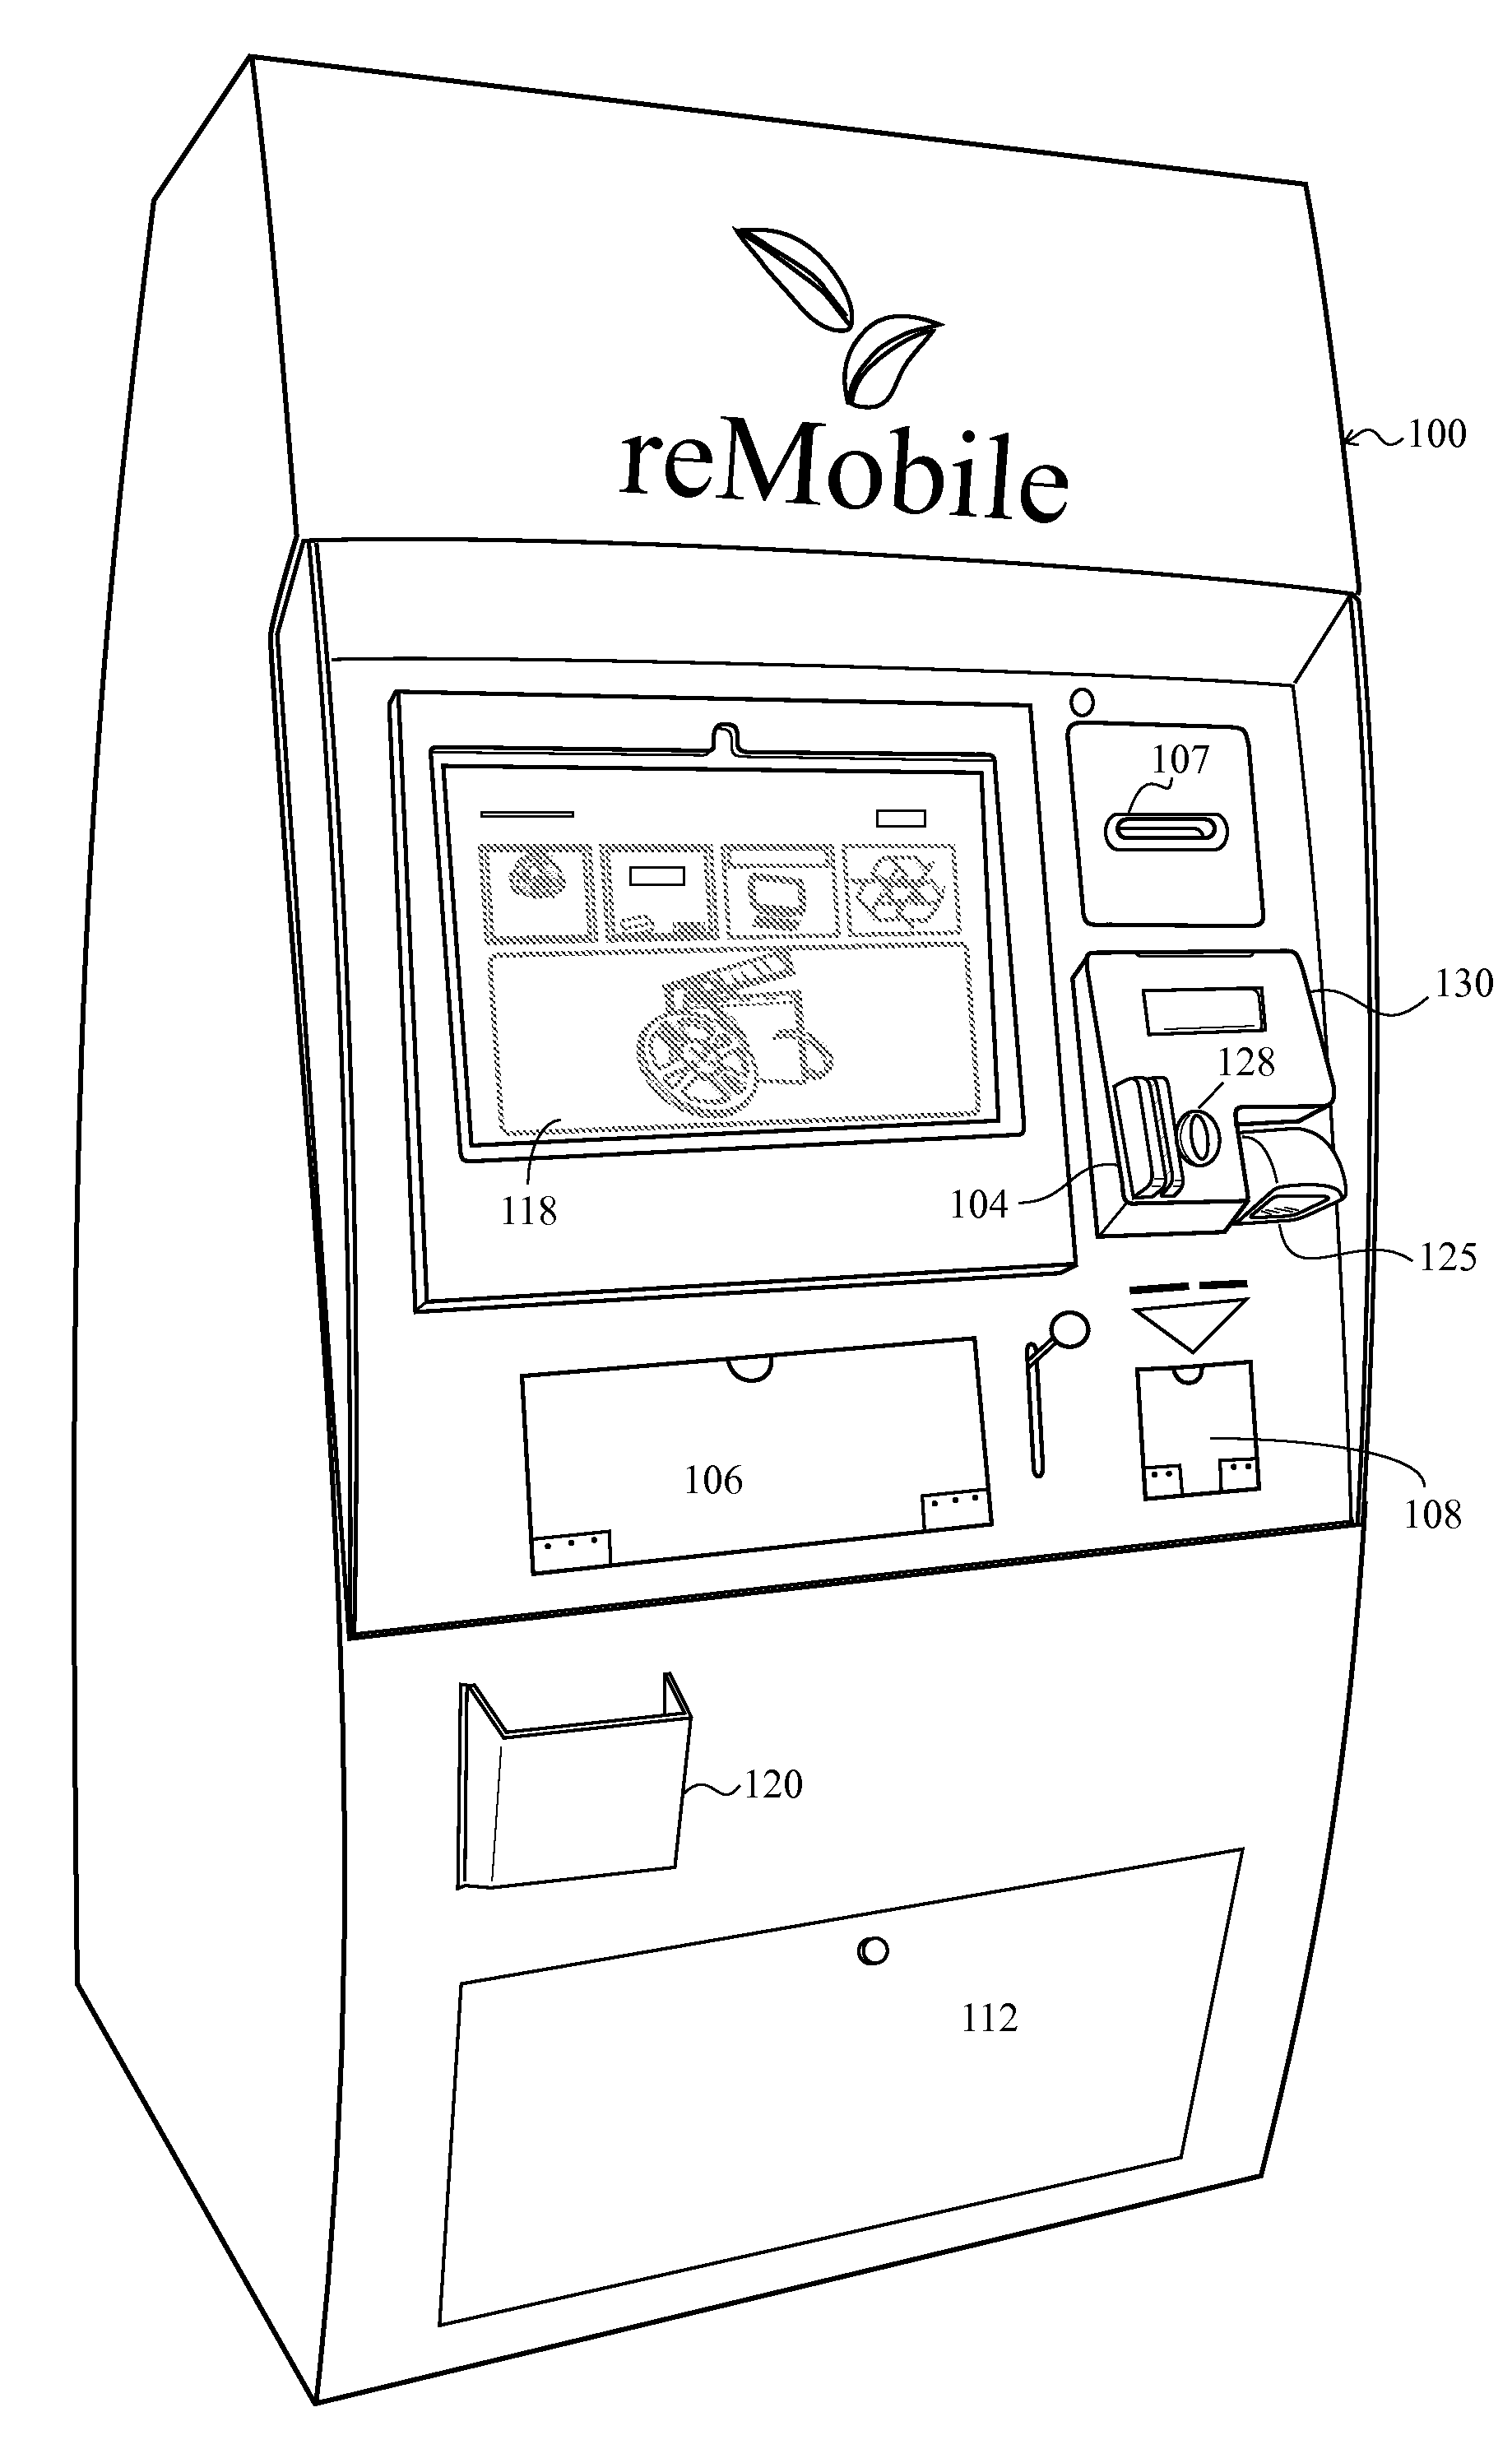 Secondary market and vending system for devices